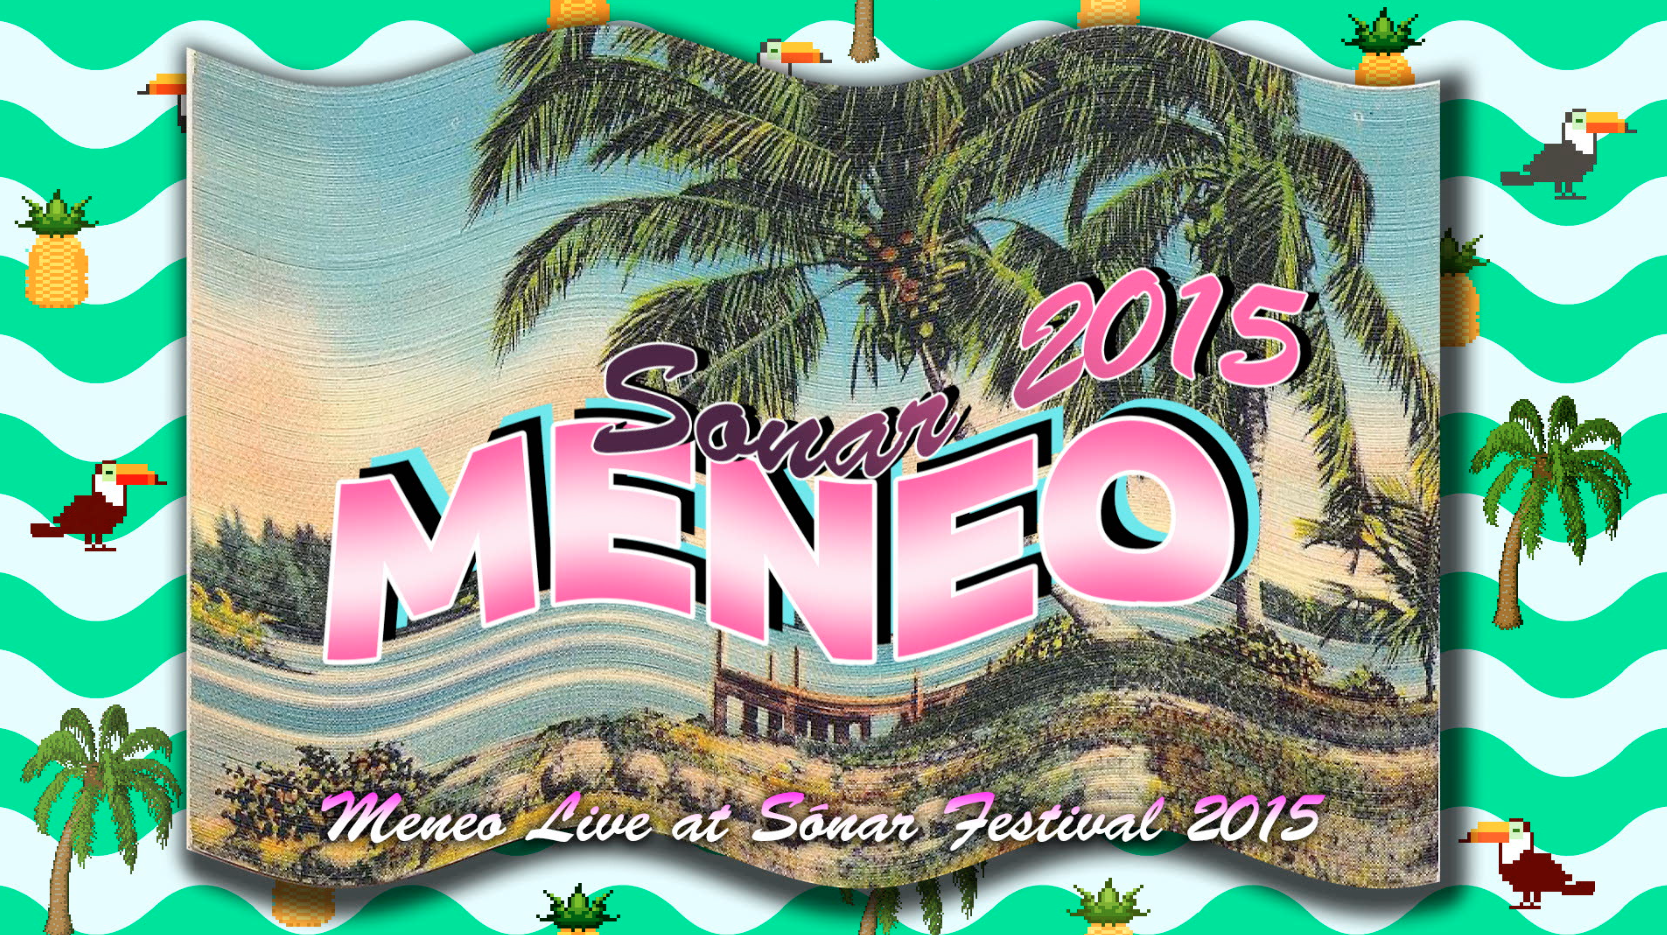 MENEO and VJ ENTTER live at Sonar 2015